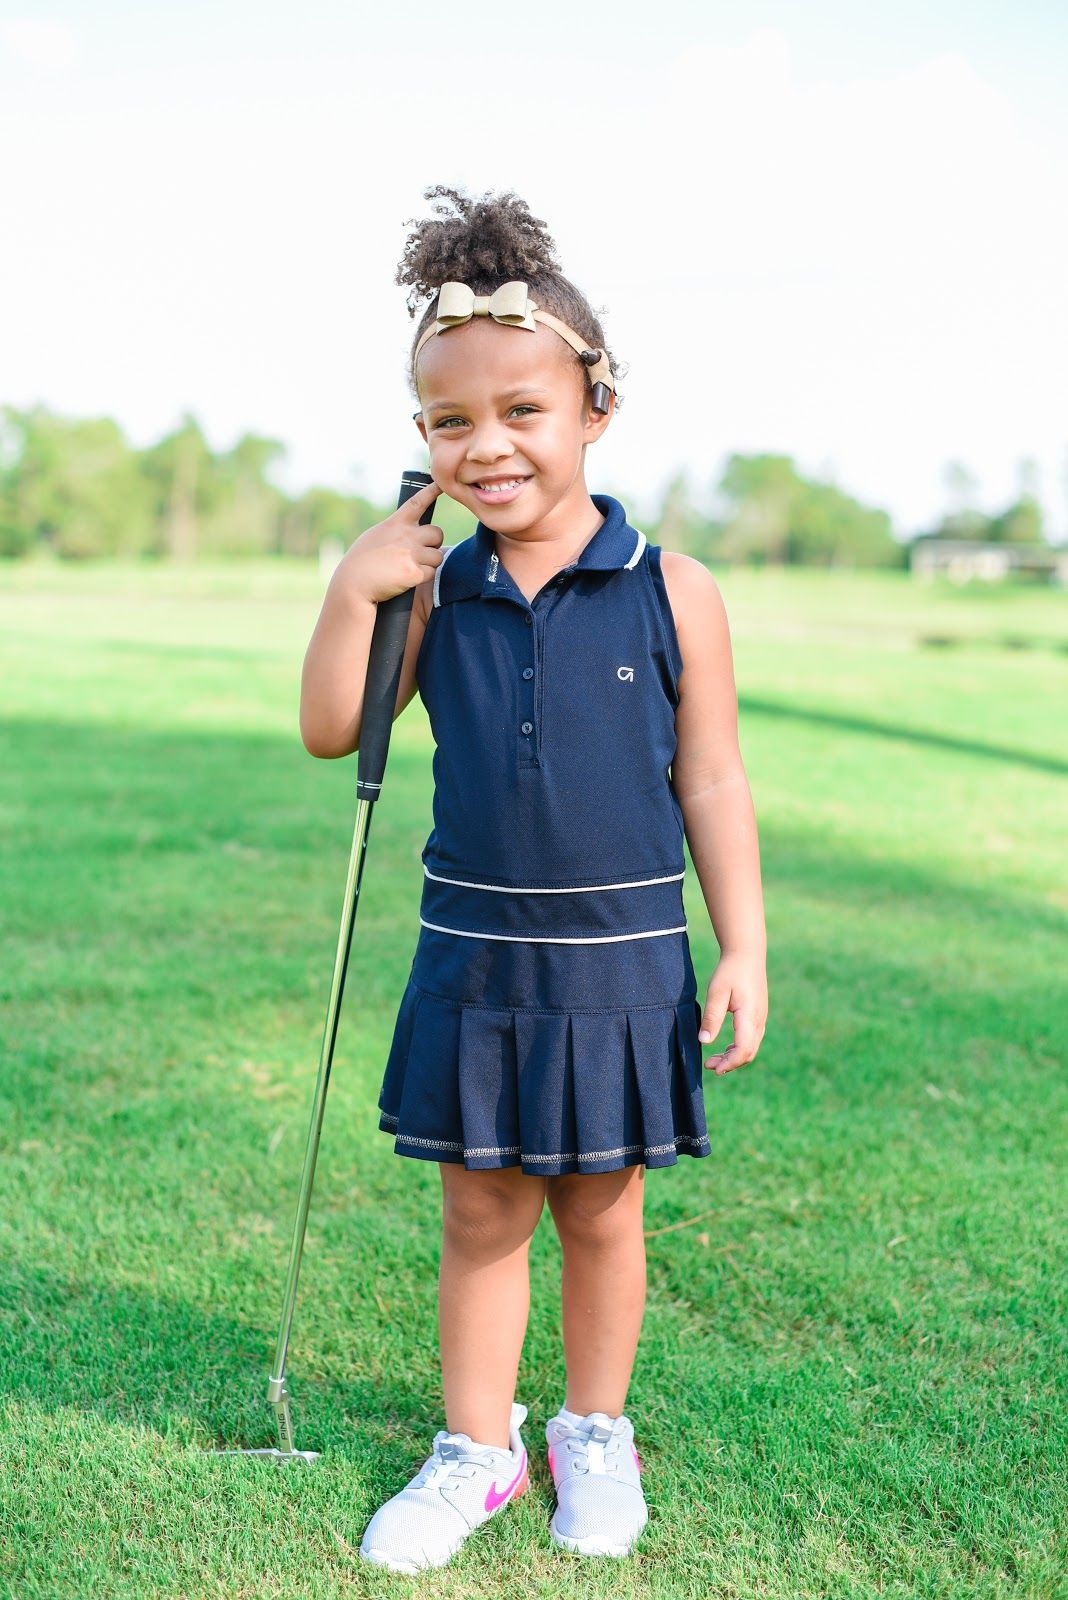 Child with auditory neuropathy spectrum disorder playing golf